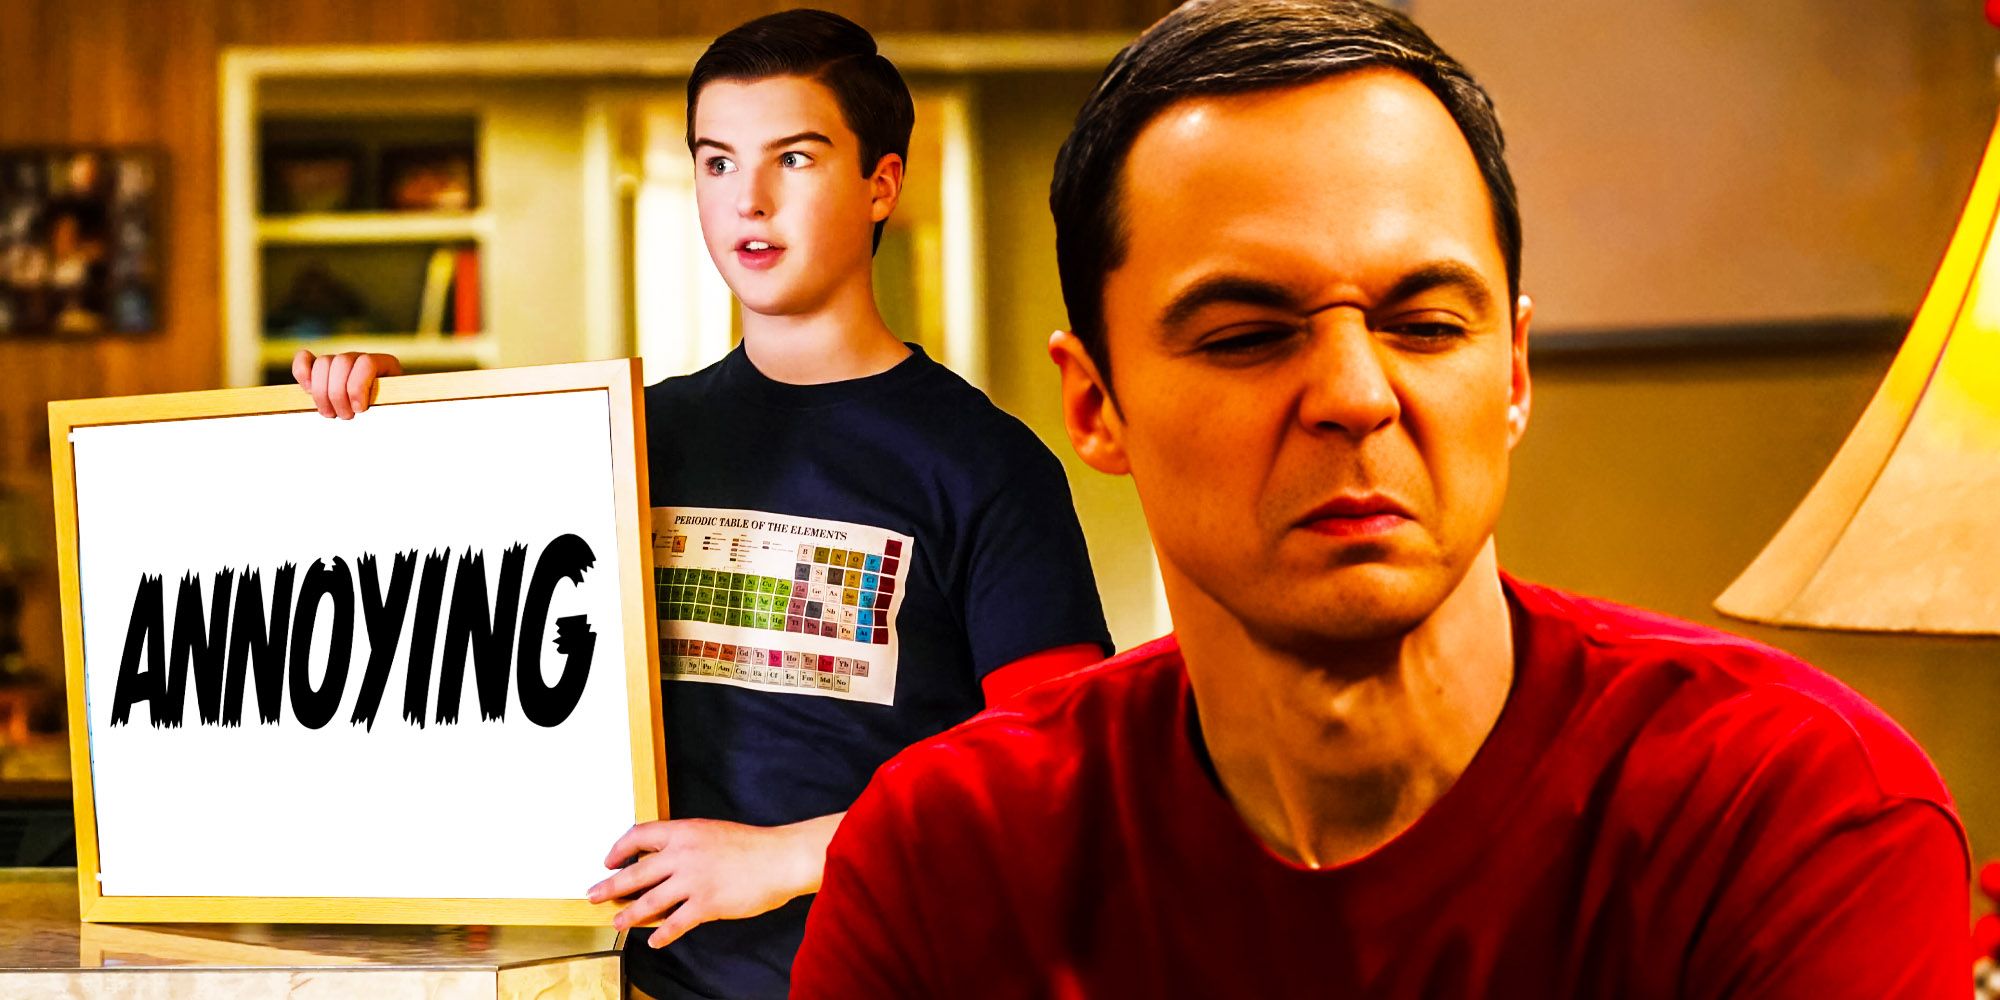 Blended image of young Sheldon holding an annoying sign and older Sheldon making a funny face in the Big Bang Theory